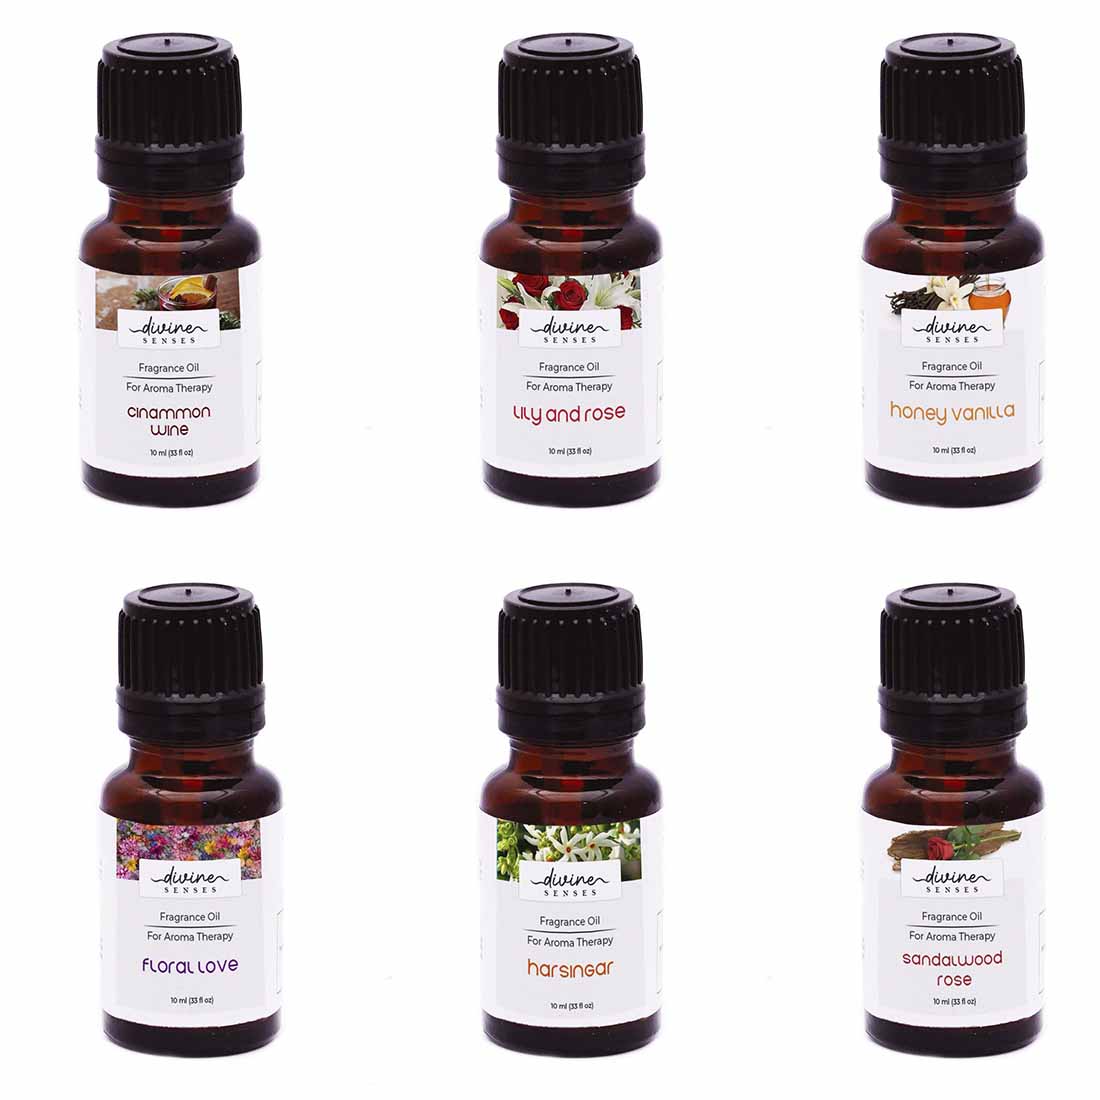 Scented Aroma Diffuser Fragrances - 10 ml each